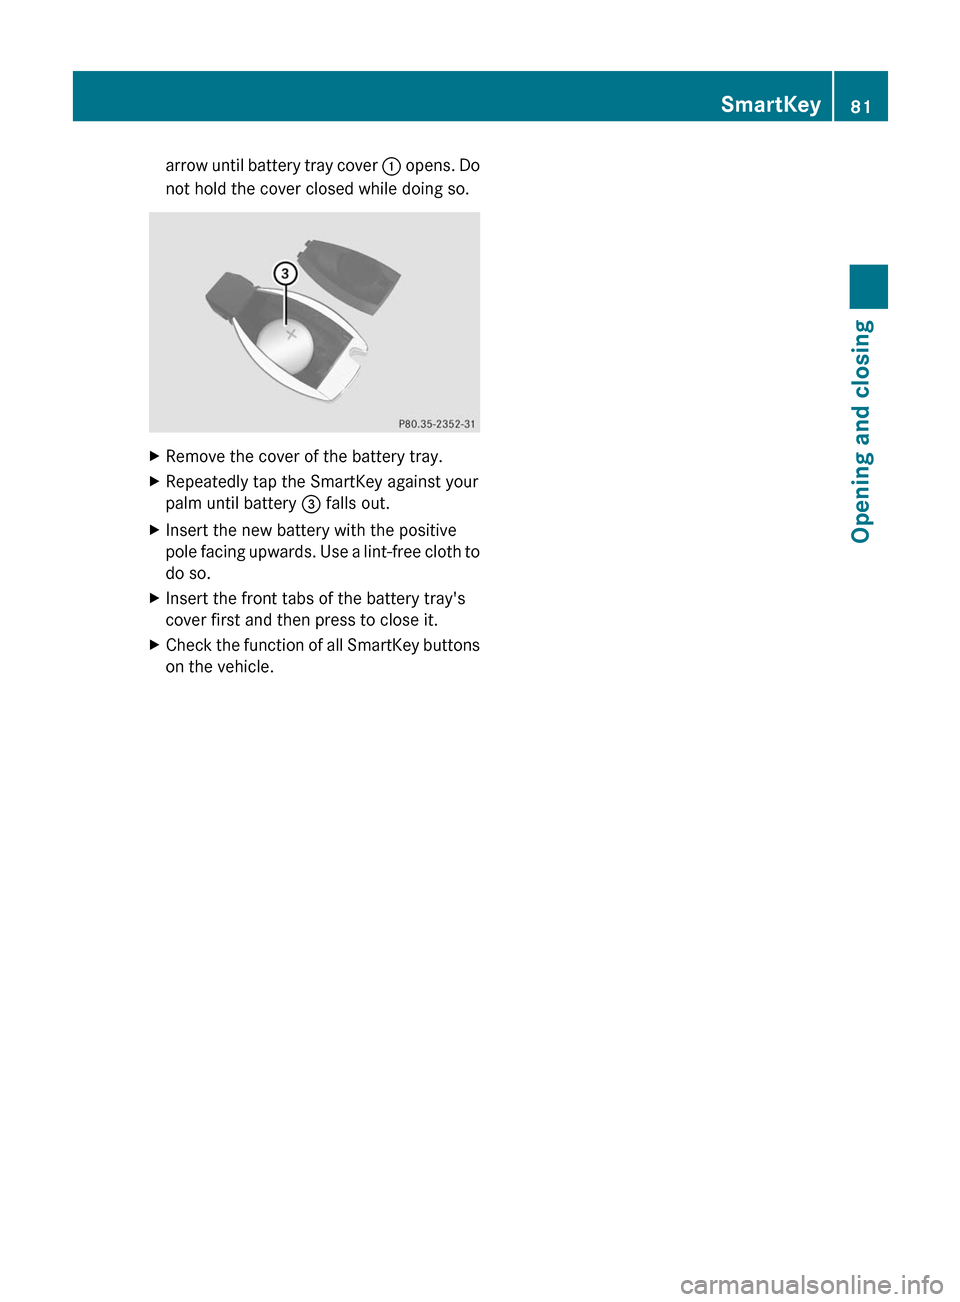 MERCEDES-BENZ E300 BLUETEC 2011 W212 Owners Manual arrow until battery tray cover : opens. Do
not hold the cover closed while doing so.XRemove the cover of the battery tray.XRepeatedly tap the SmartKey against your
palm until battery  = falls out.XIns